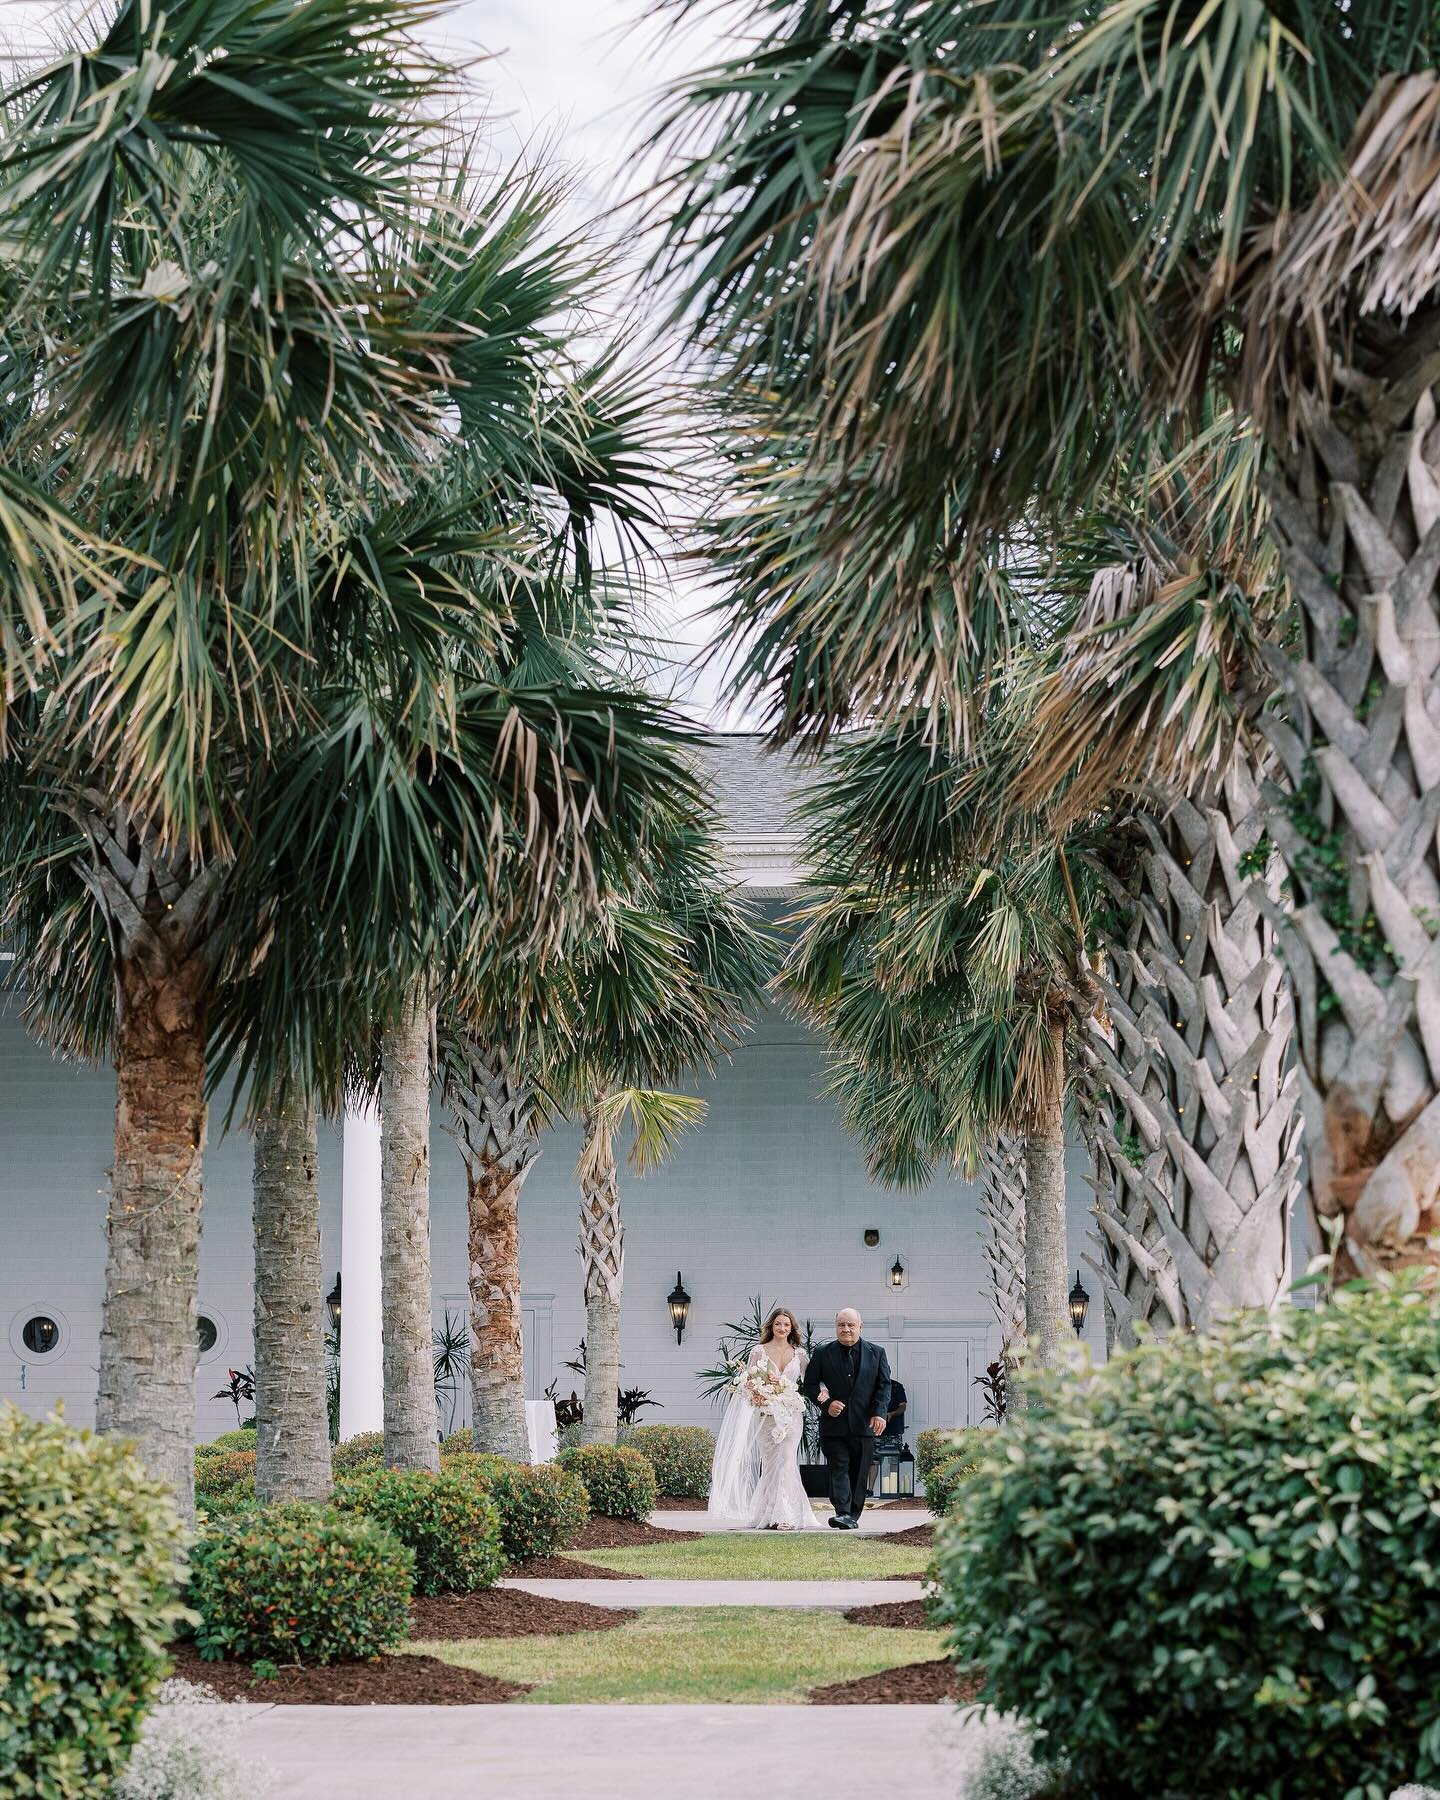 The longest palm aisle, a poolside dinner, and seaside portraits - here&rsquo;s to the dreamiest day 👏🏻

Jade and Maverick were such an incredible couple to design for, we can&rsquo;t help but reminisce as beach season begins. We&rsquo;re channelin